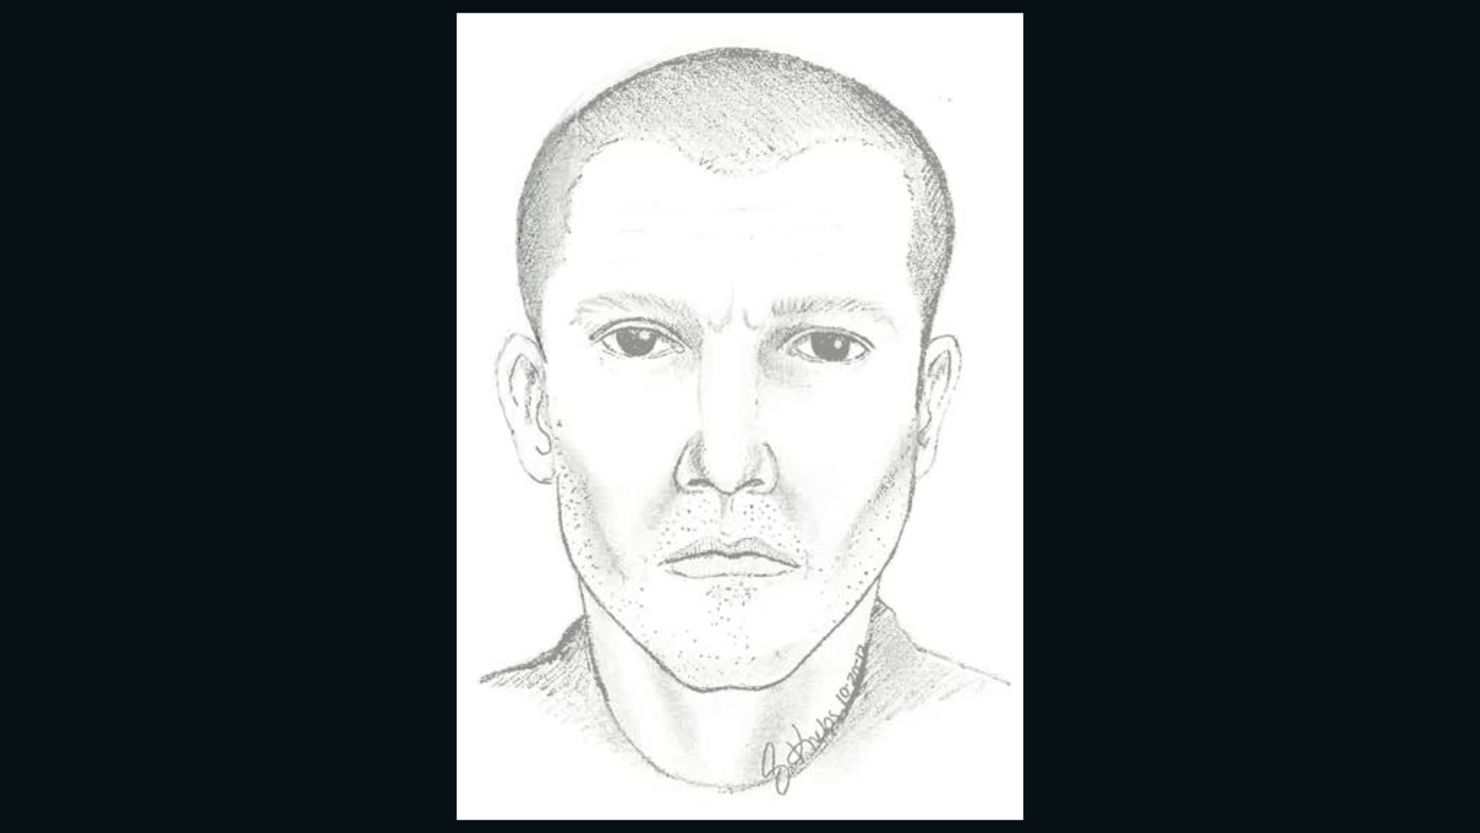 Police issued a composite of a suspect in the shootings in Michigan's Oakland, Livingston, and Ingham counties.